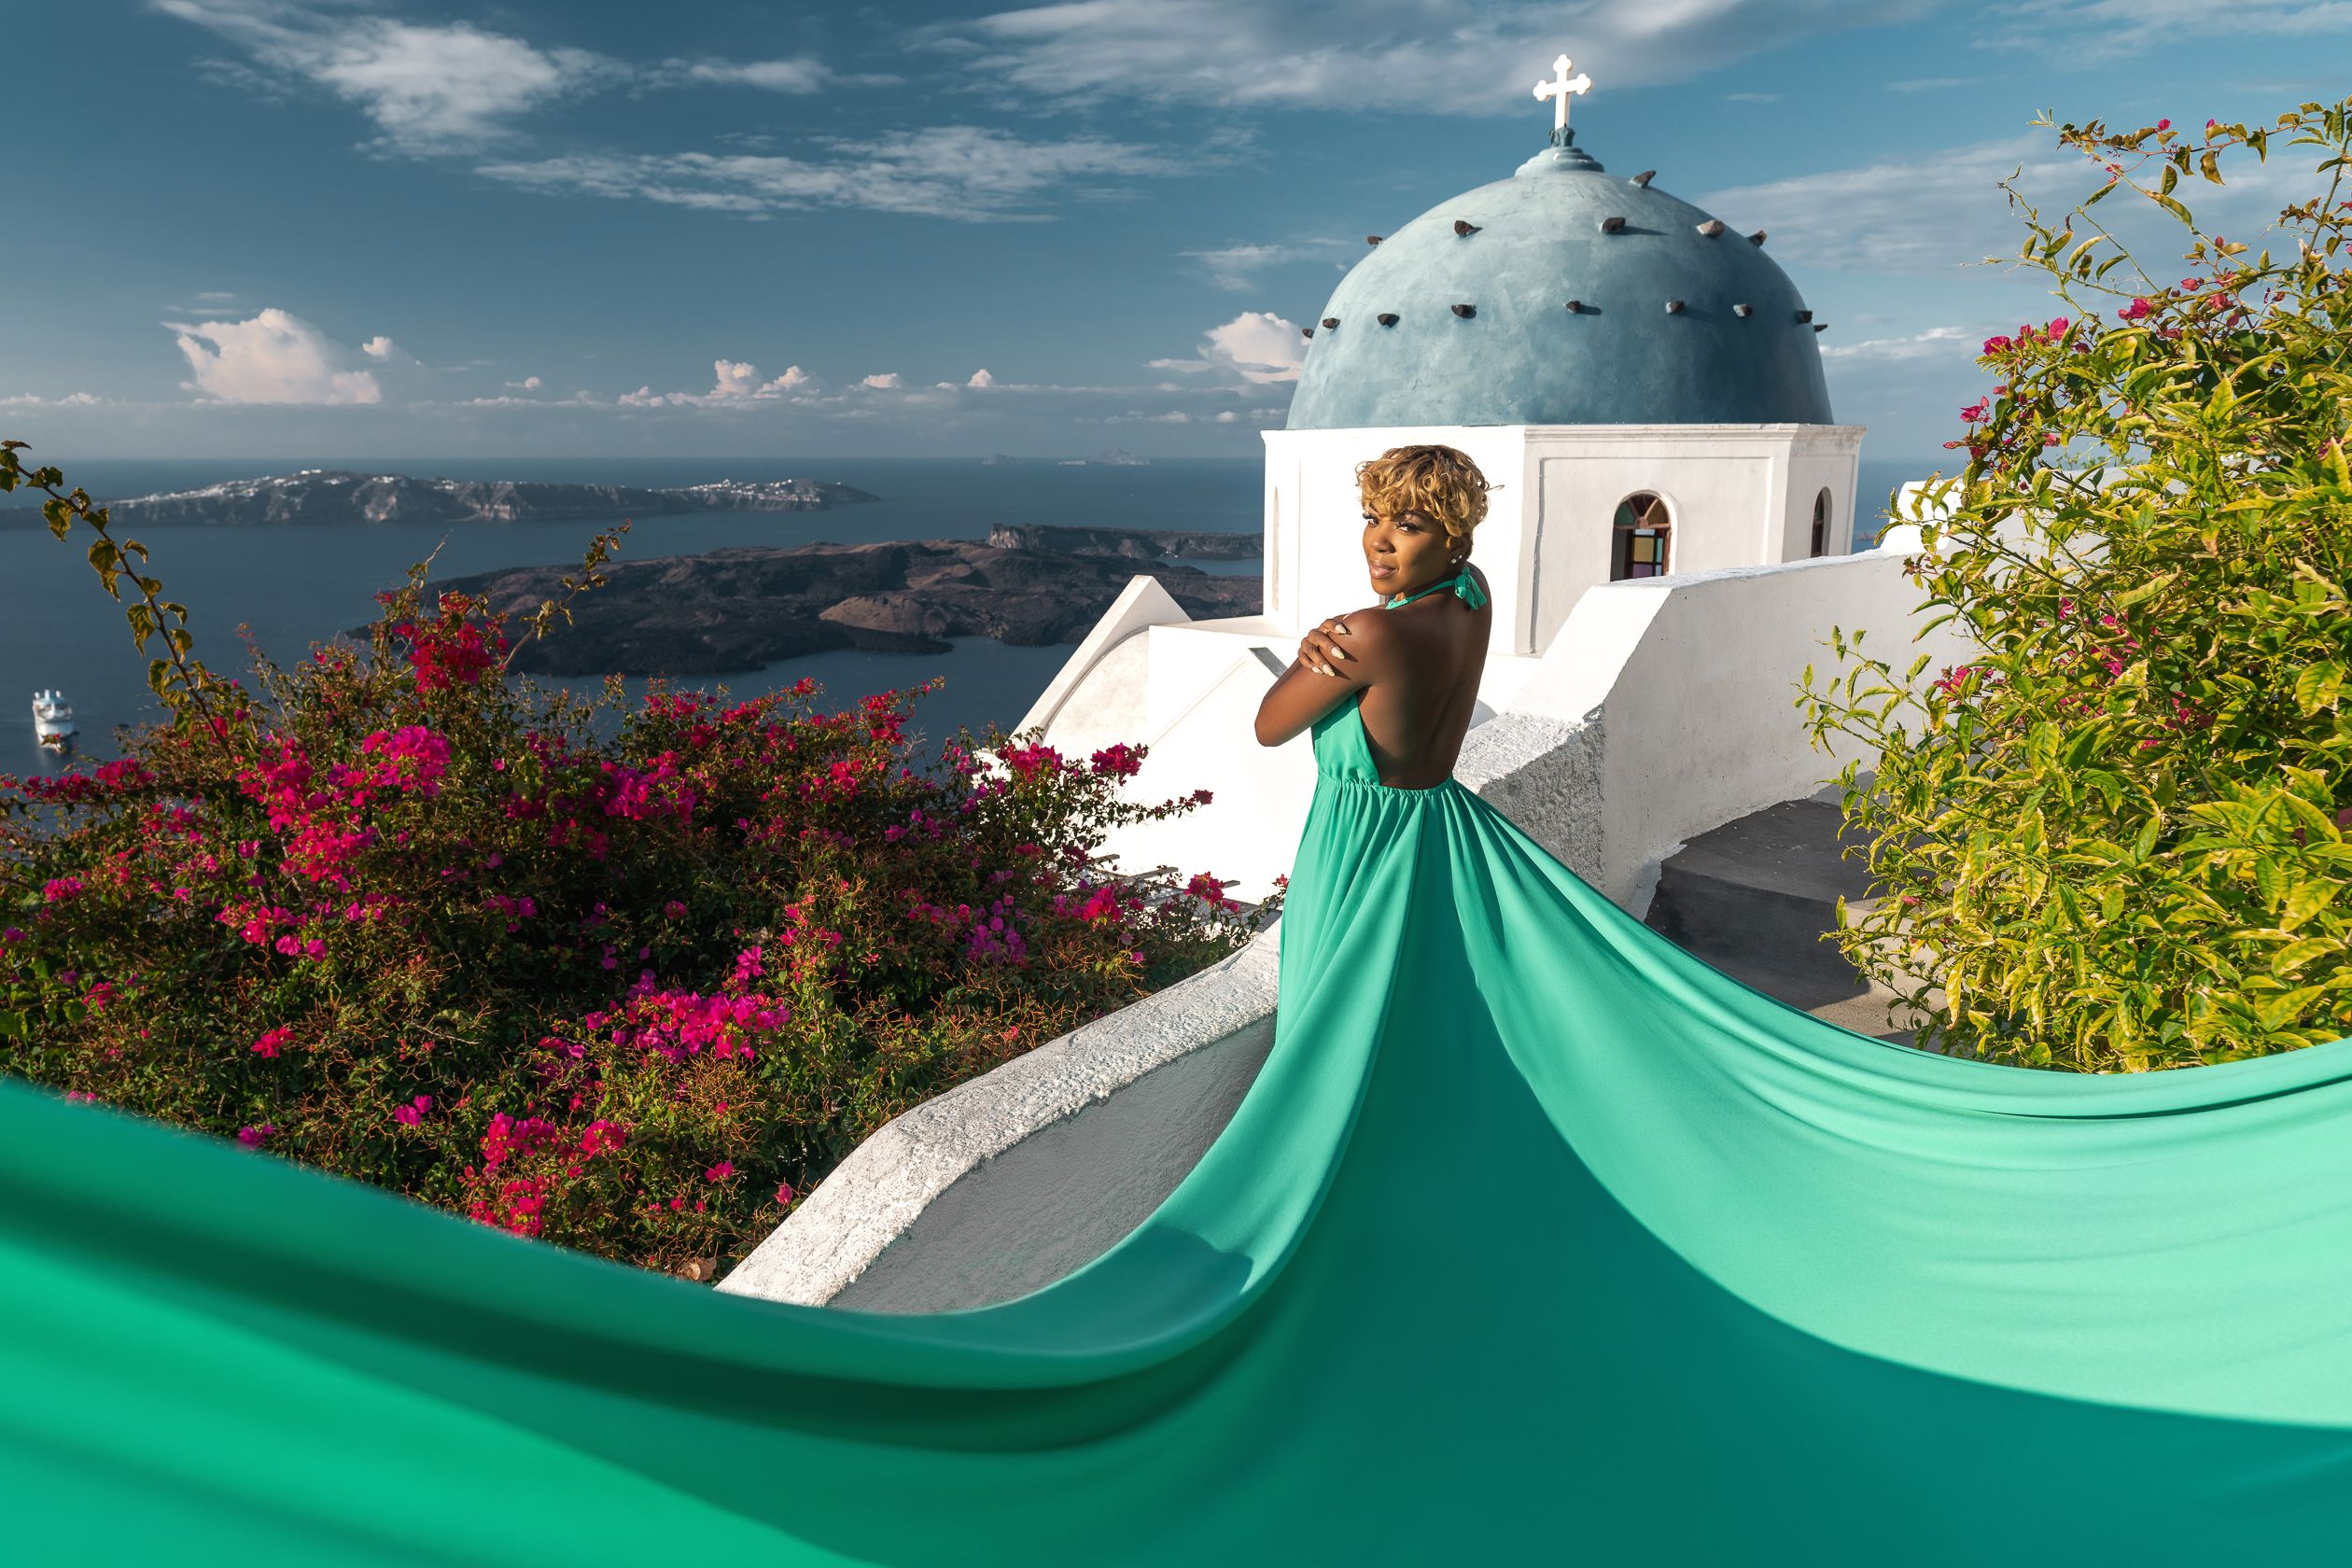 Photoshoot with a green flying dress in Imerovigli, Greece